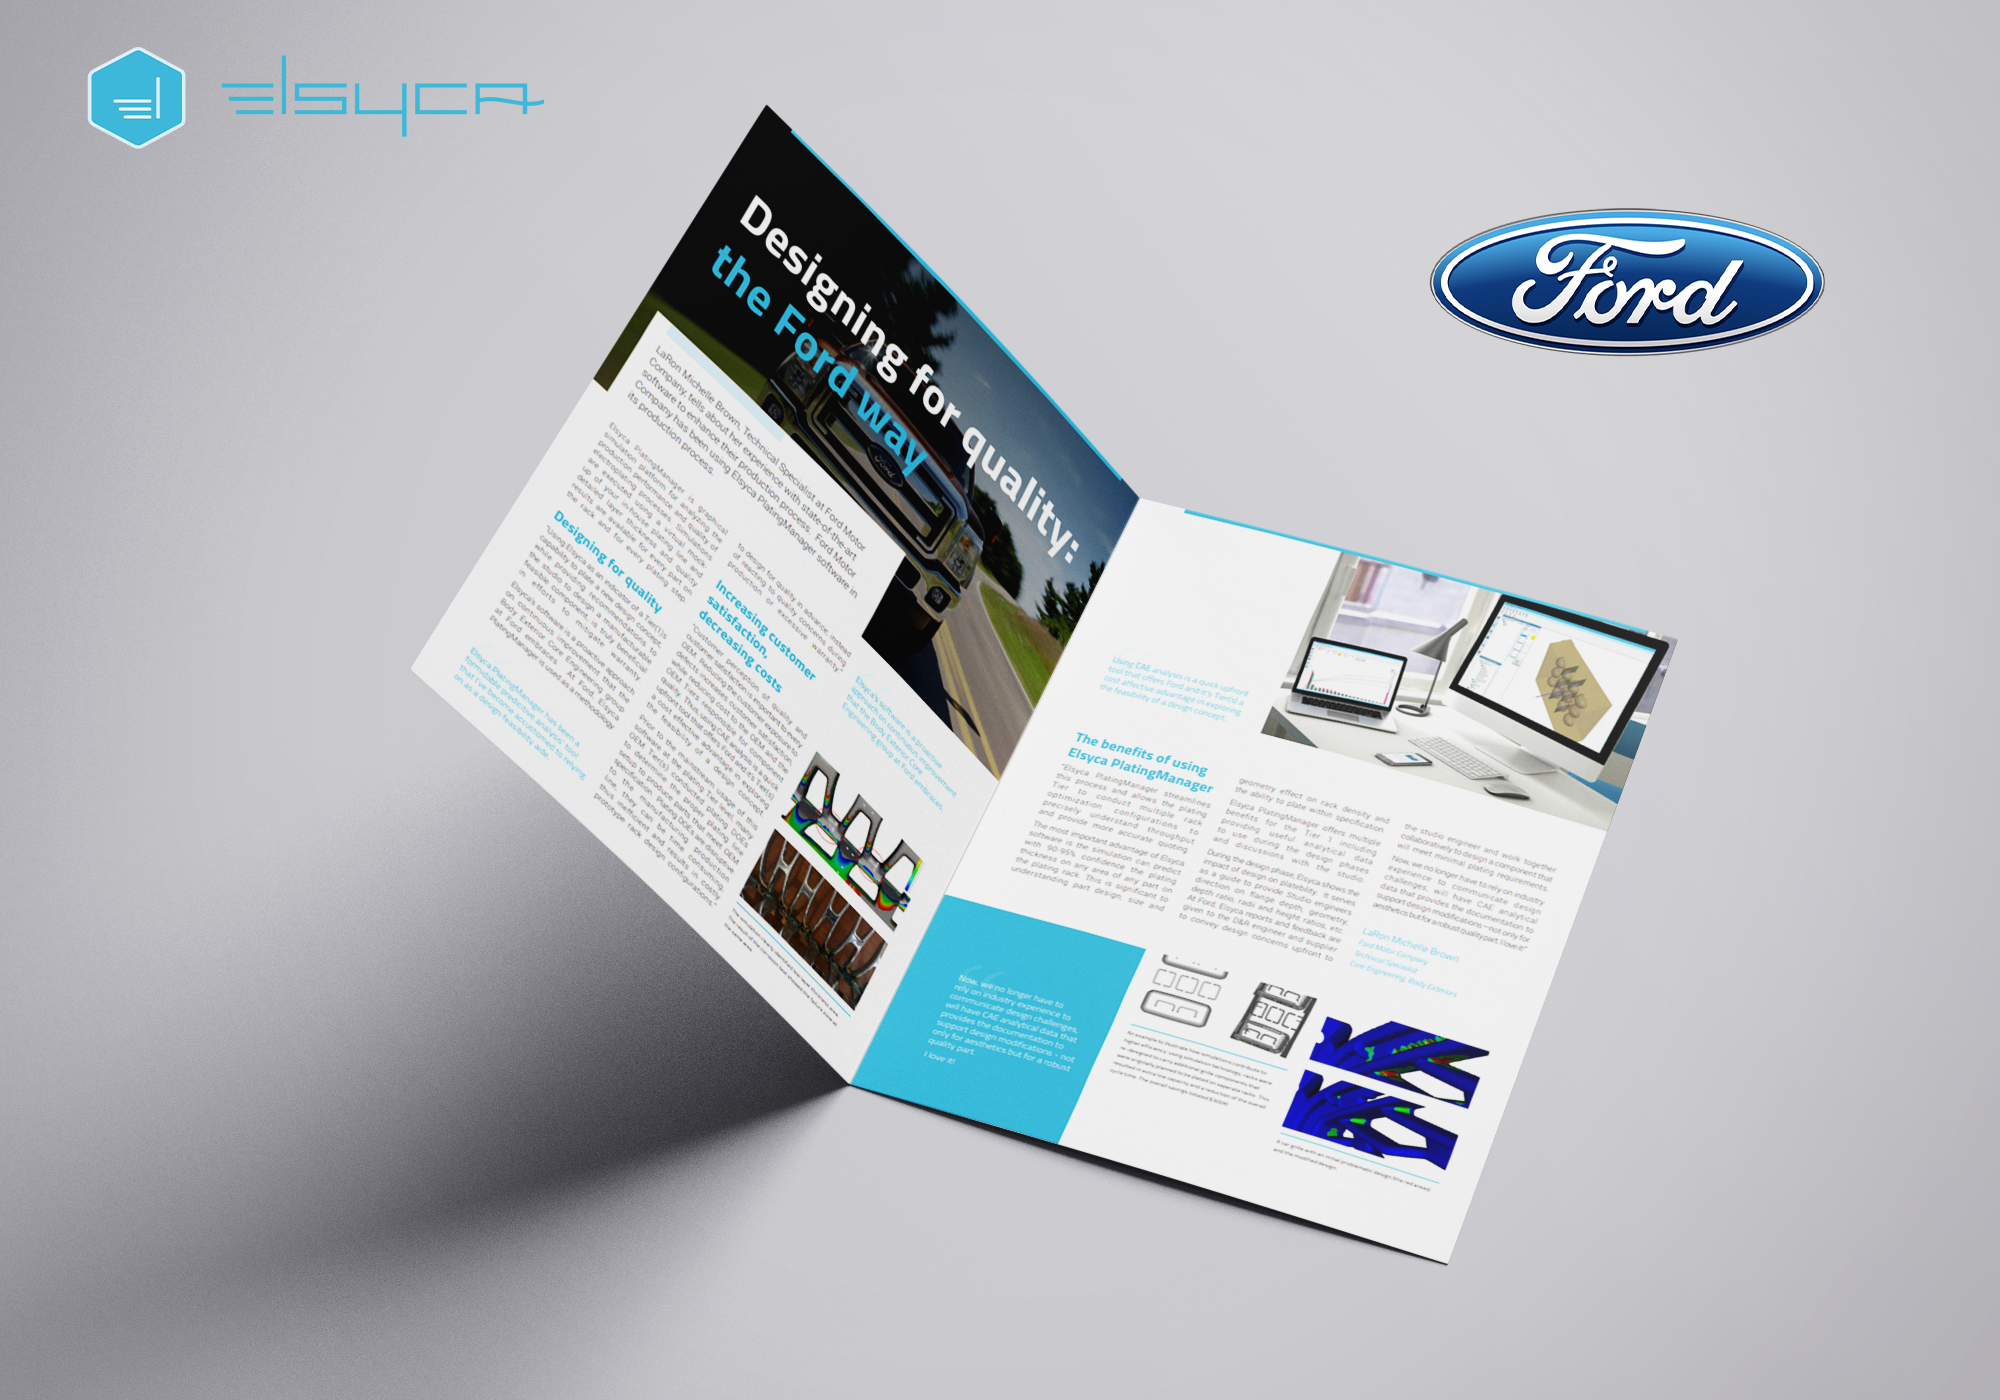 Designing for quality: the Ford way